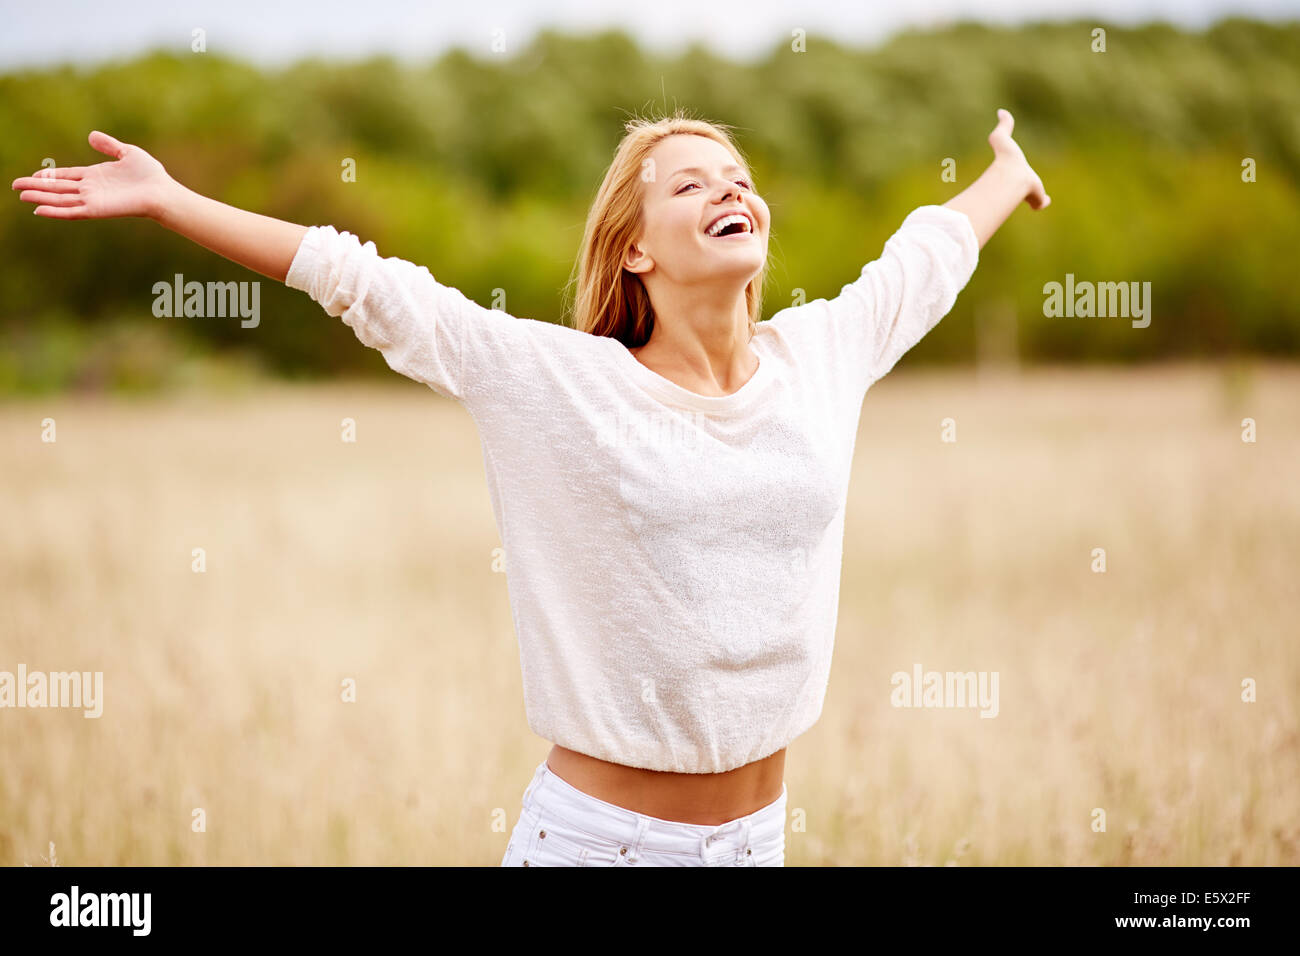 Image of happy woman with outstretched arms standing in field Stock Photo